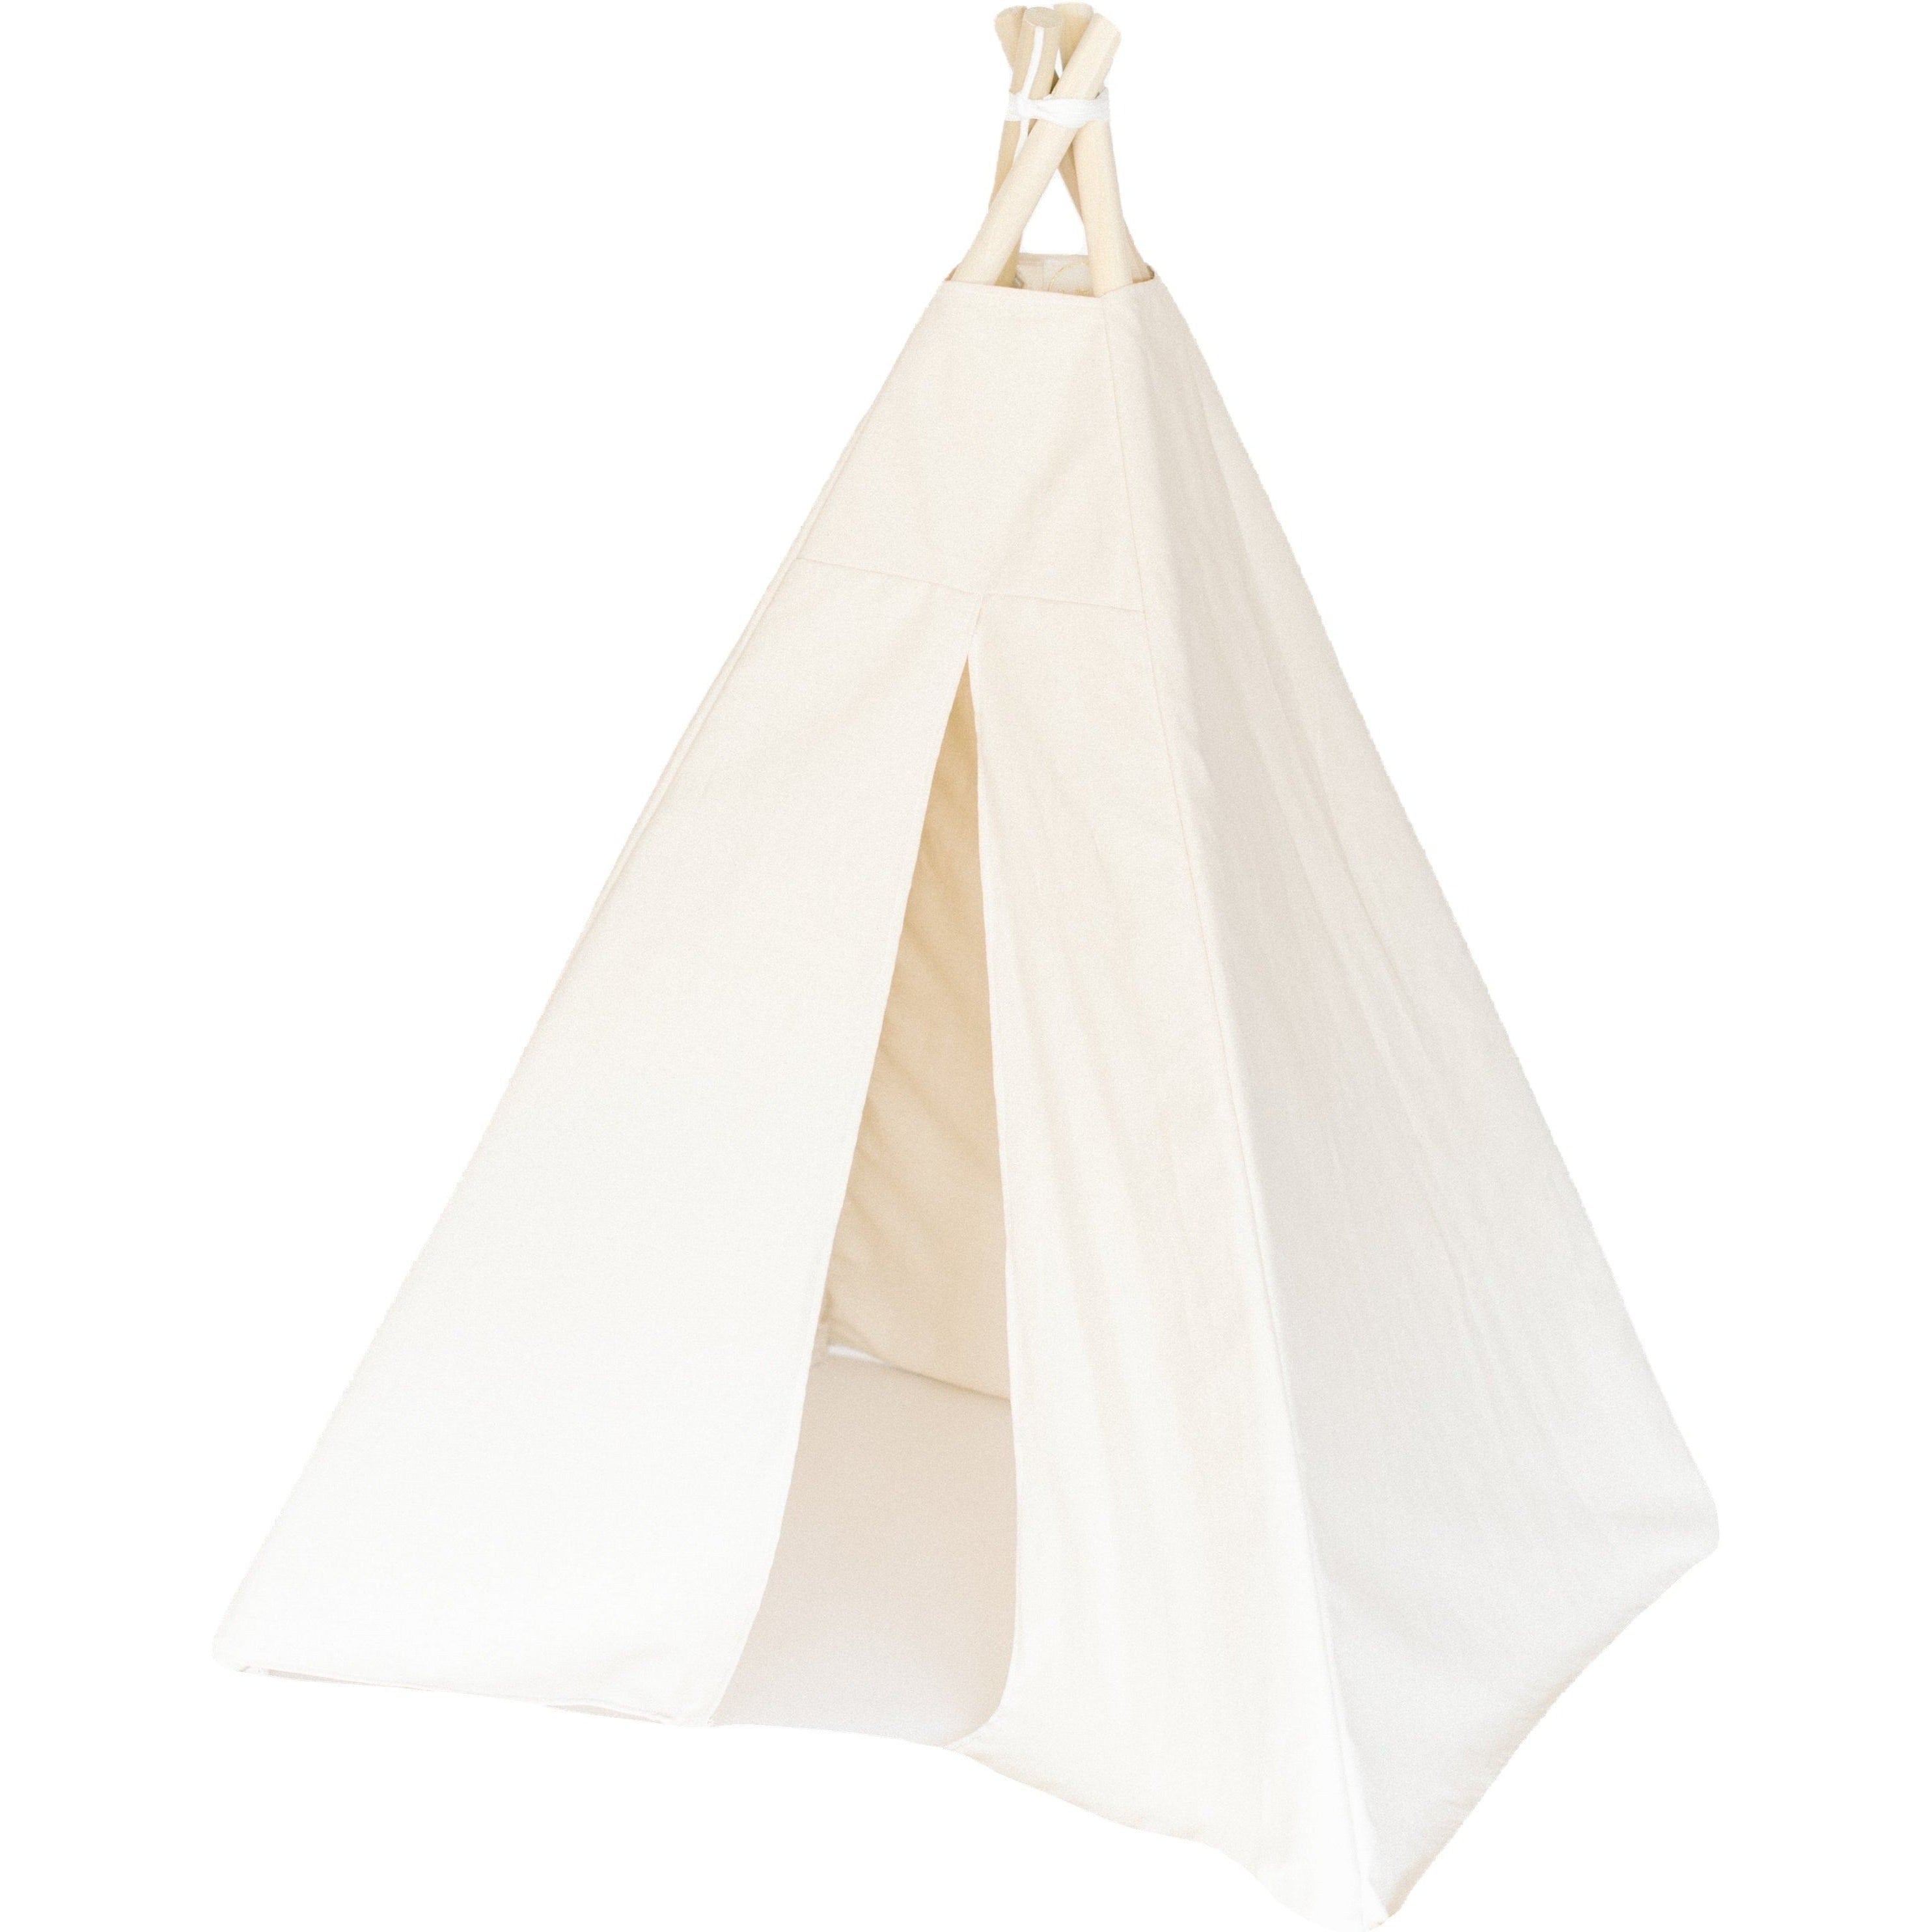 The Andrew Itty Bitty Play Tent